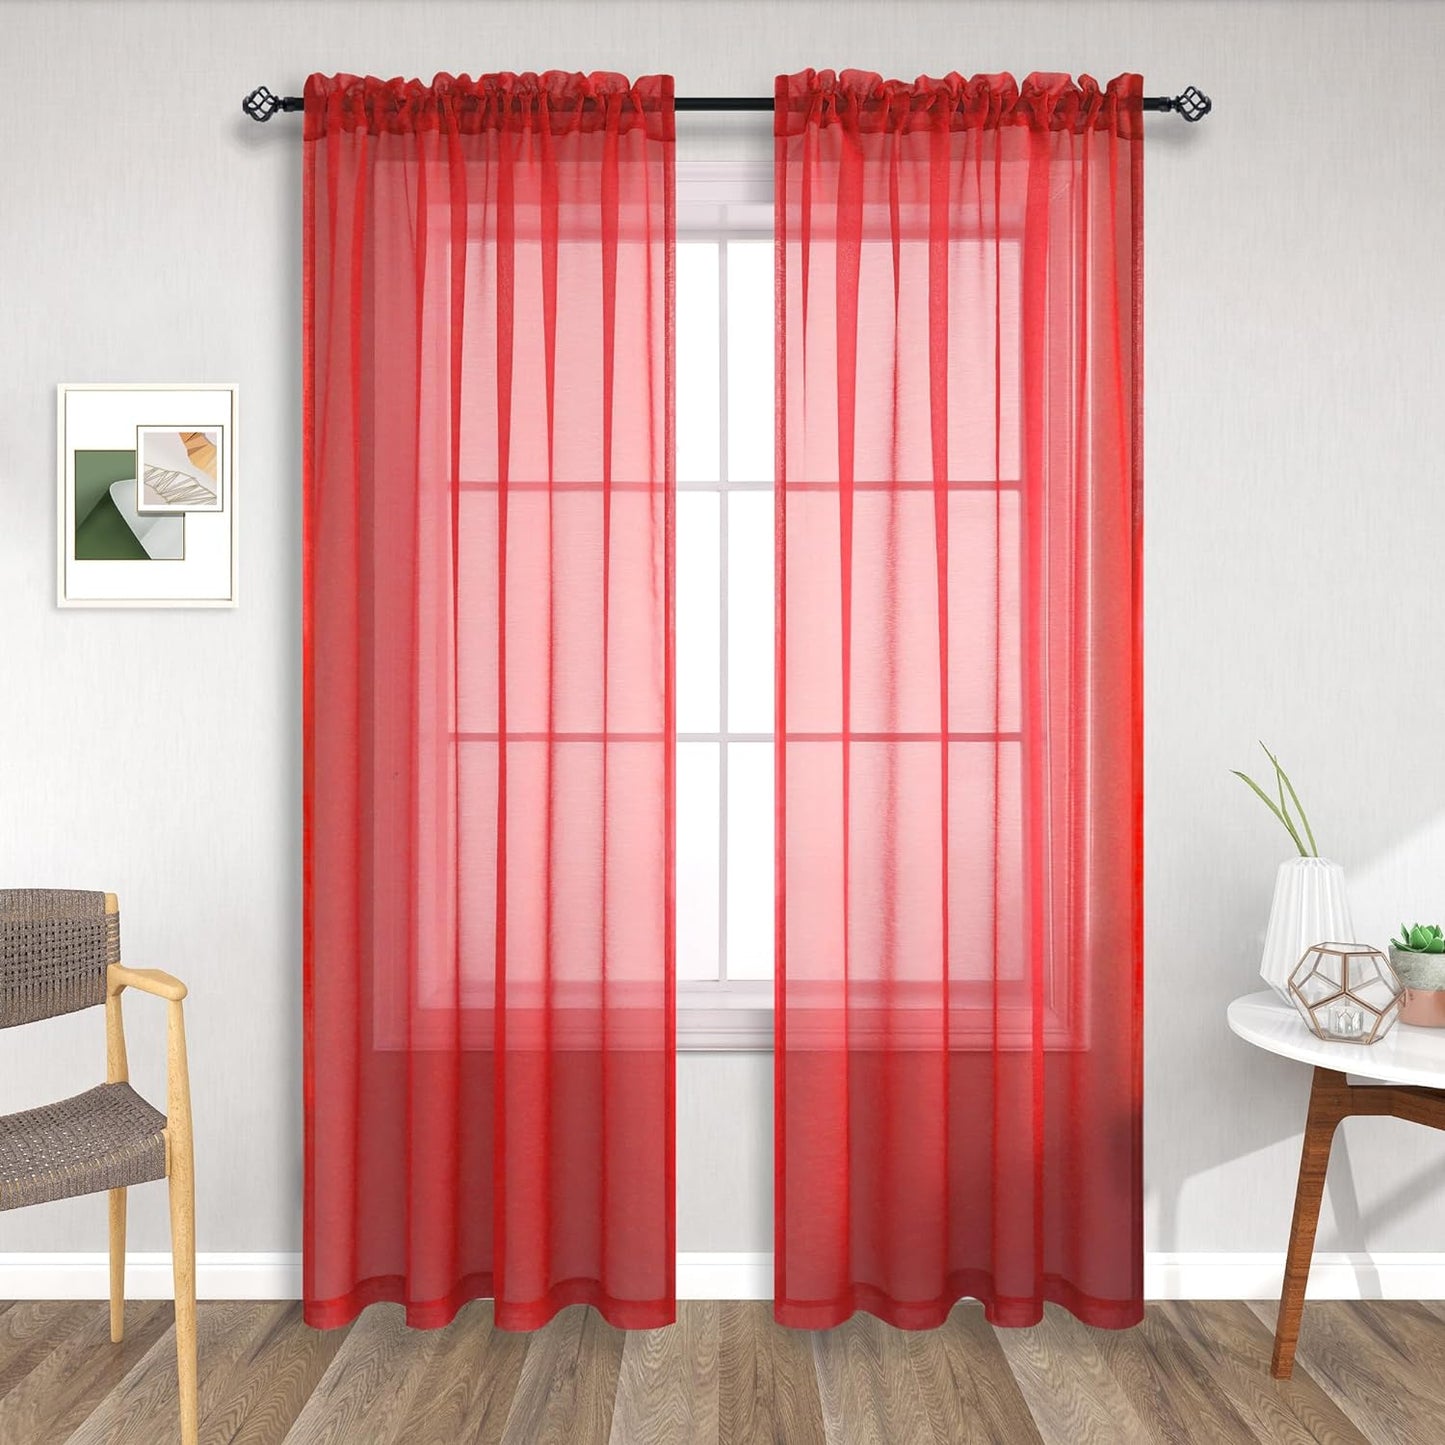 Terracotta Curtains 84 Inch Length for Living Room 2 Panel Sets Rod Pocket Sheer Curtains for Living Room Rust Burnt Orange Red  PITALK TEXTILE Red 52X84 